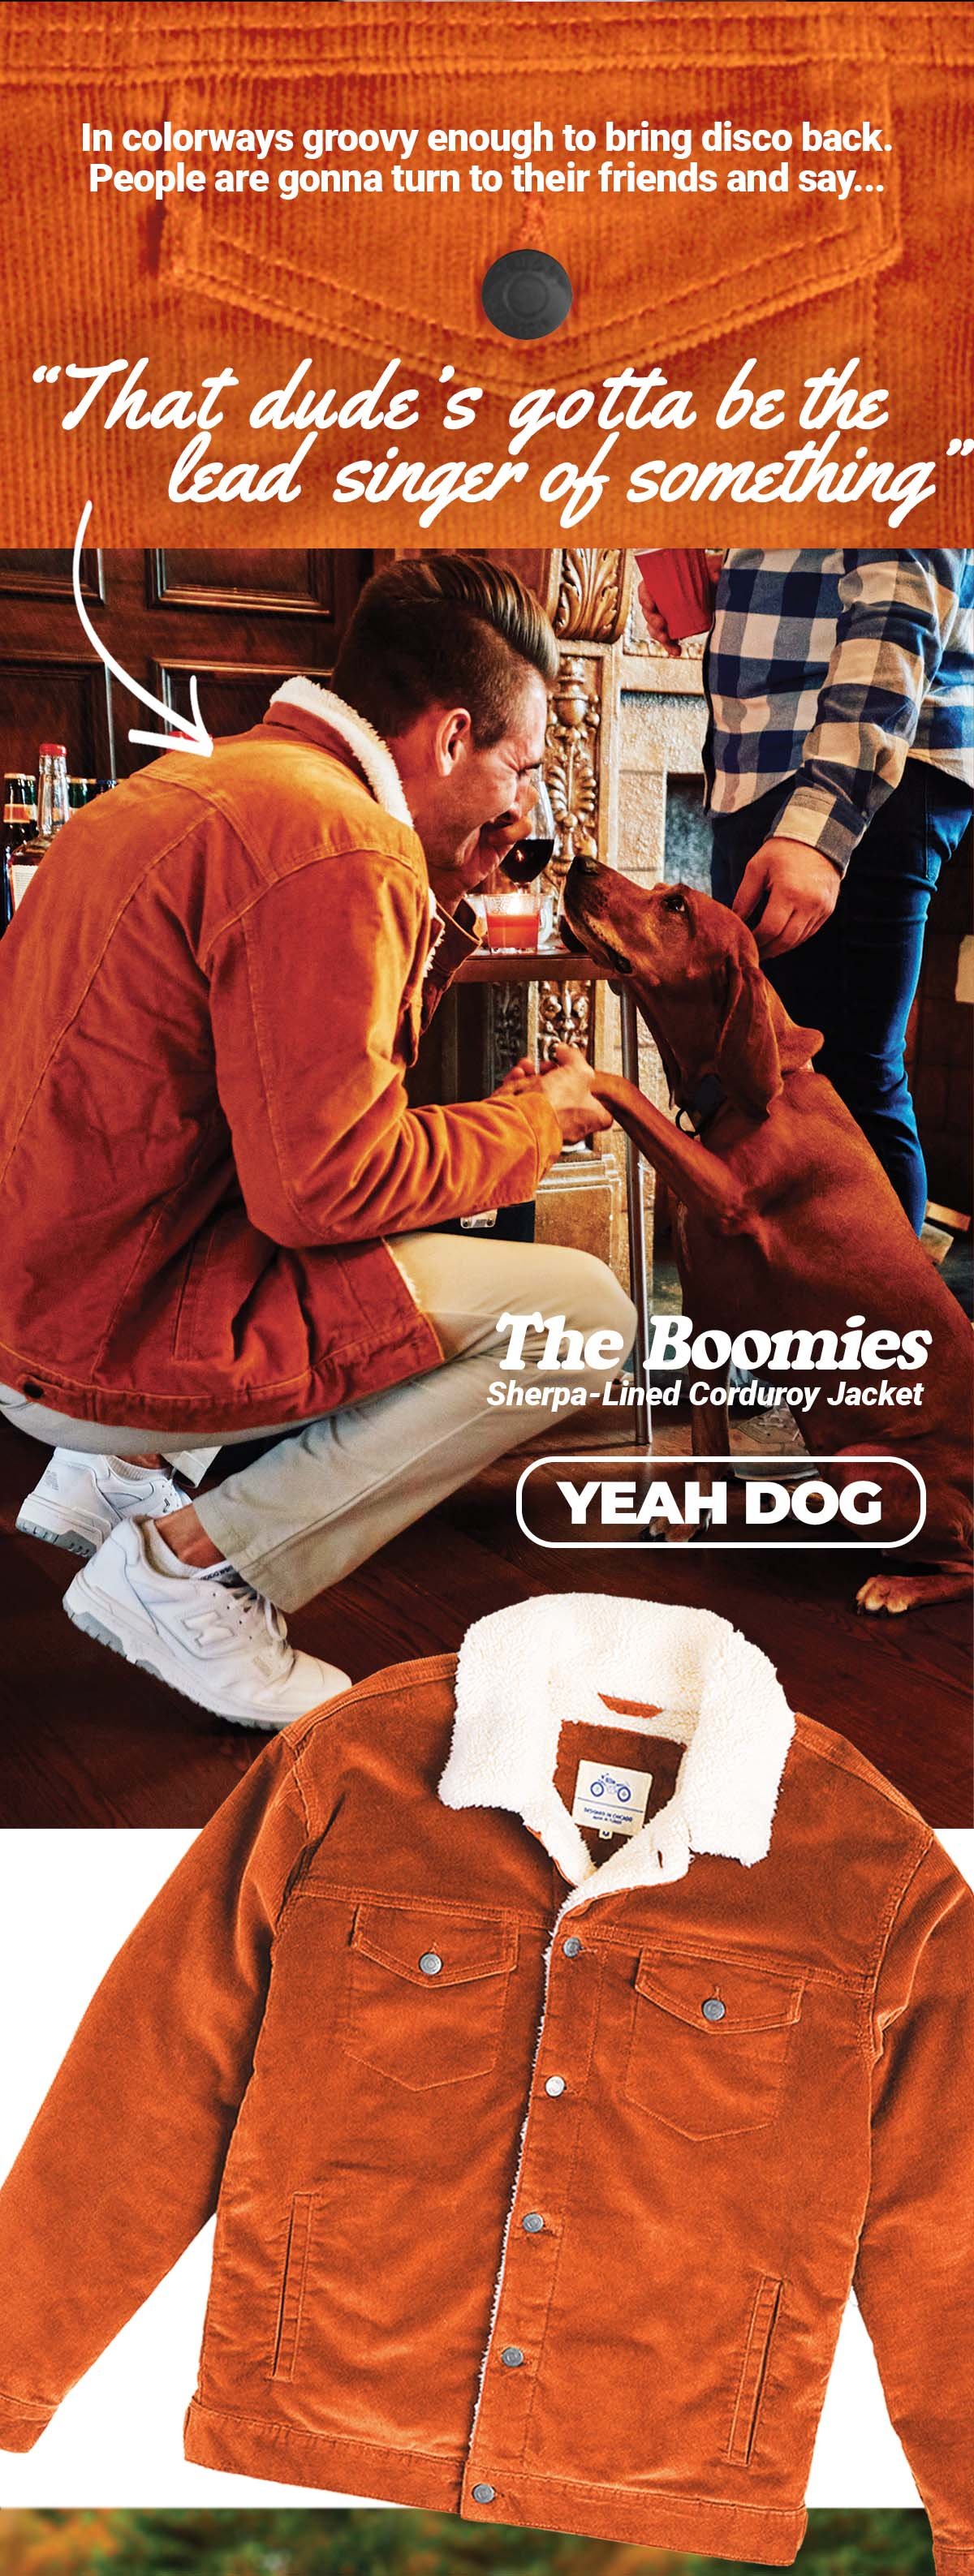 The Boomies Sherpa-Lined Corduroy Jacket